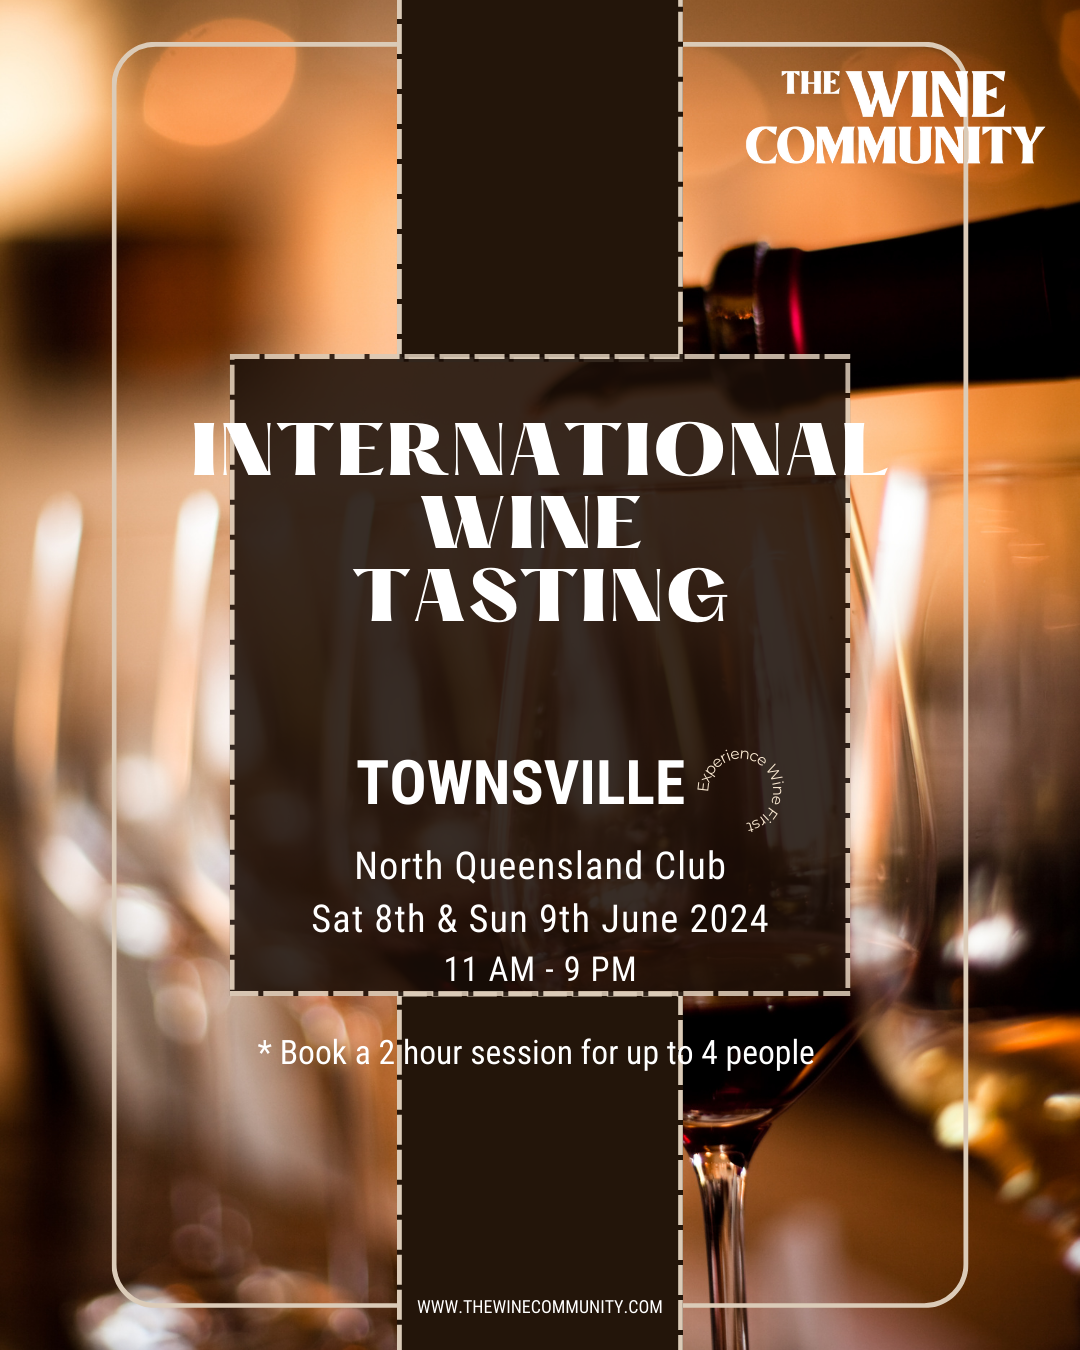 WINE TASTING at Townsville- Saturday 8th June 2024